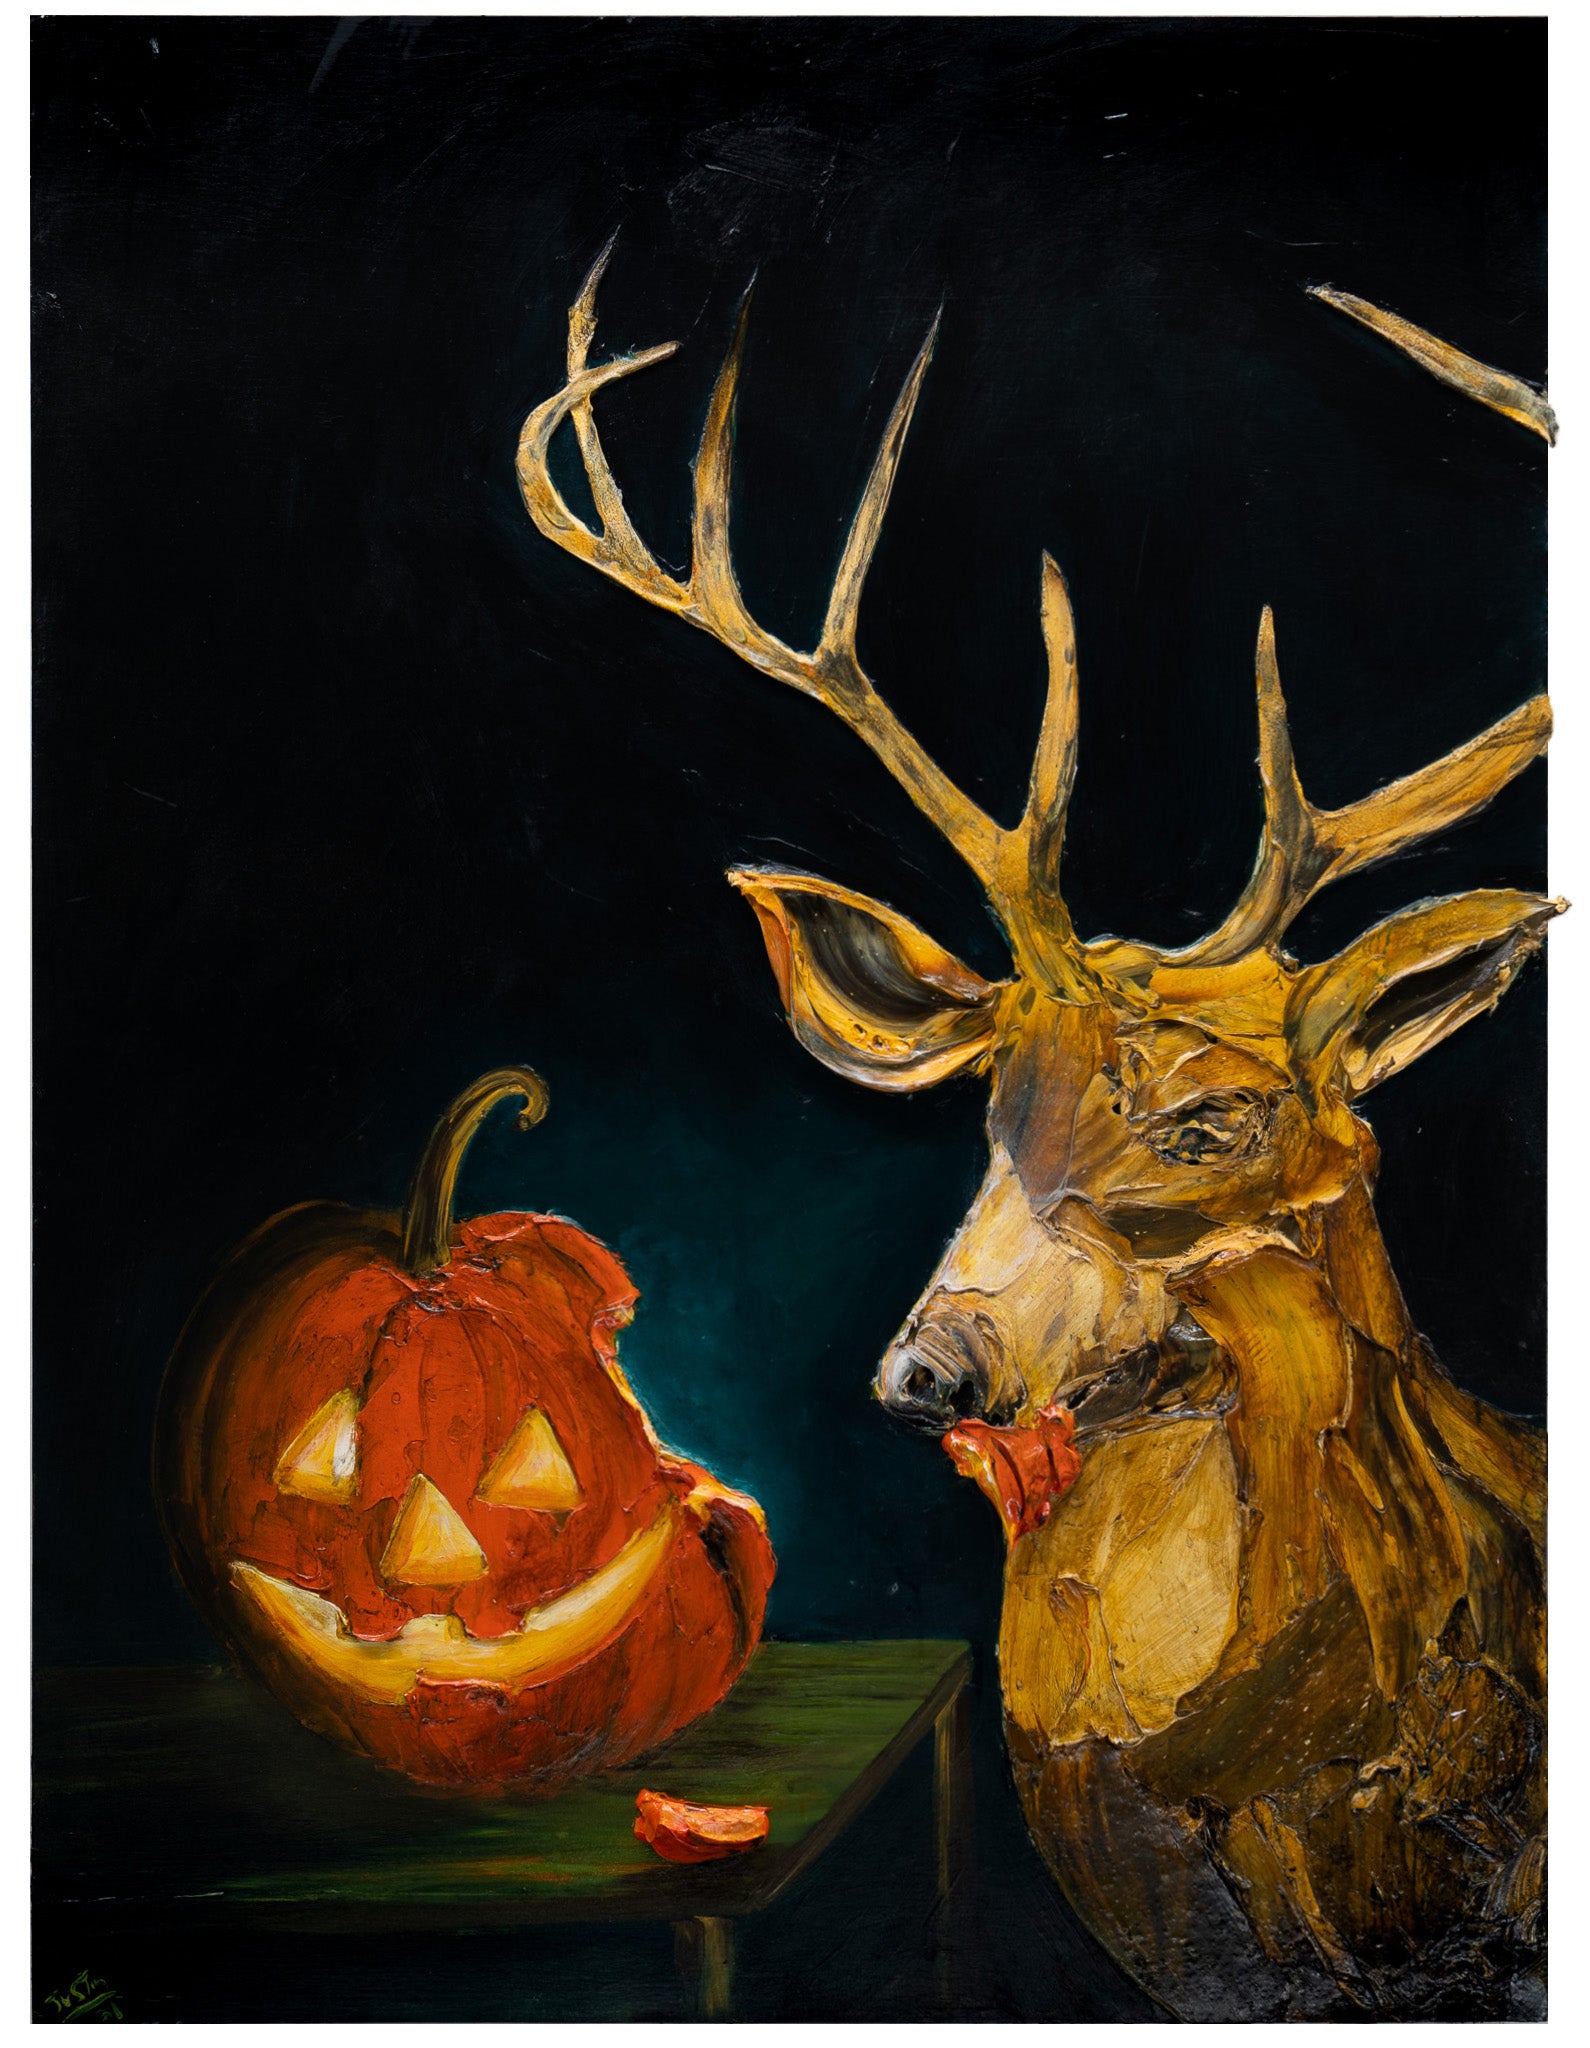 Stag and Pumpkin, 36x48